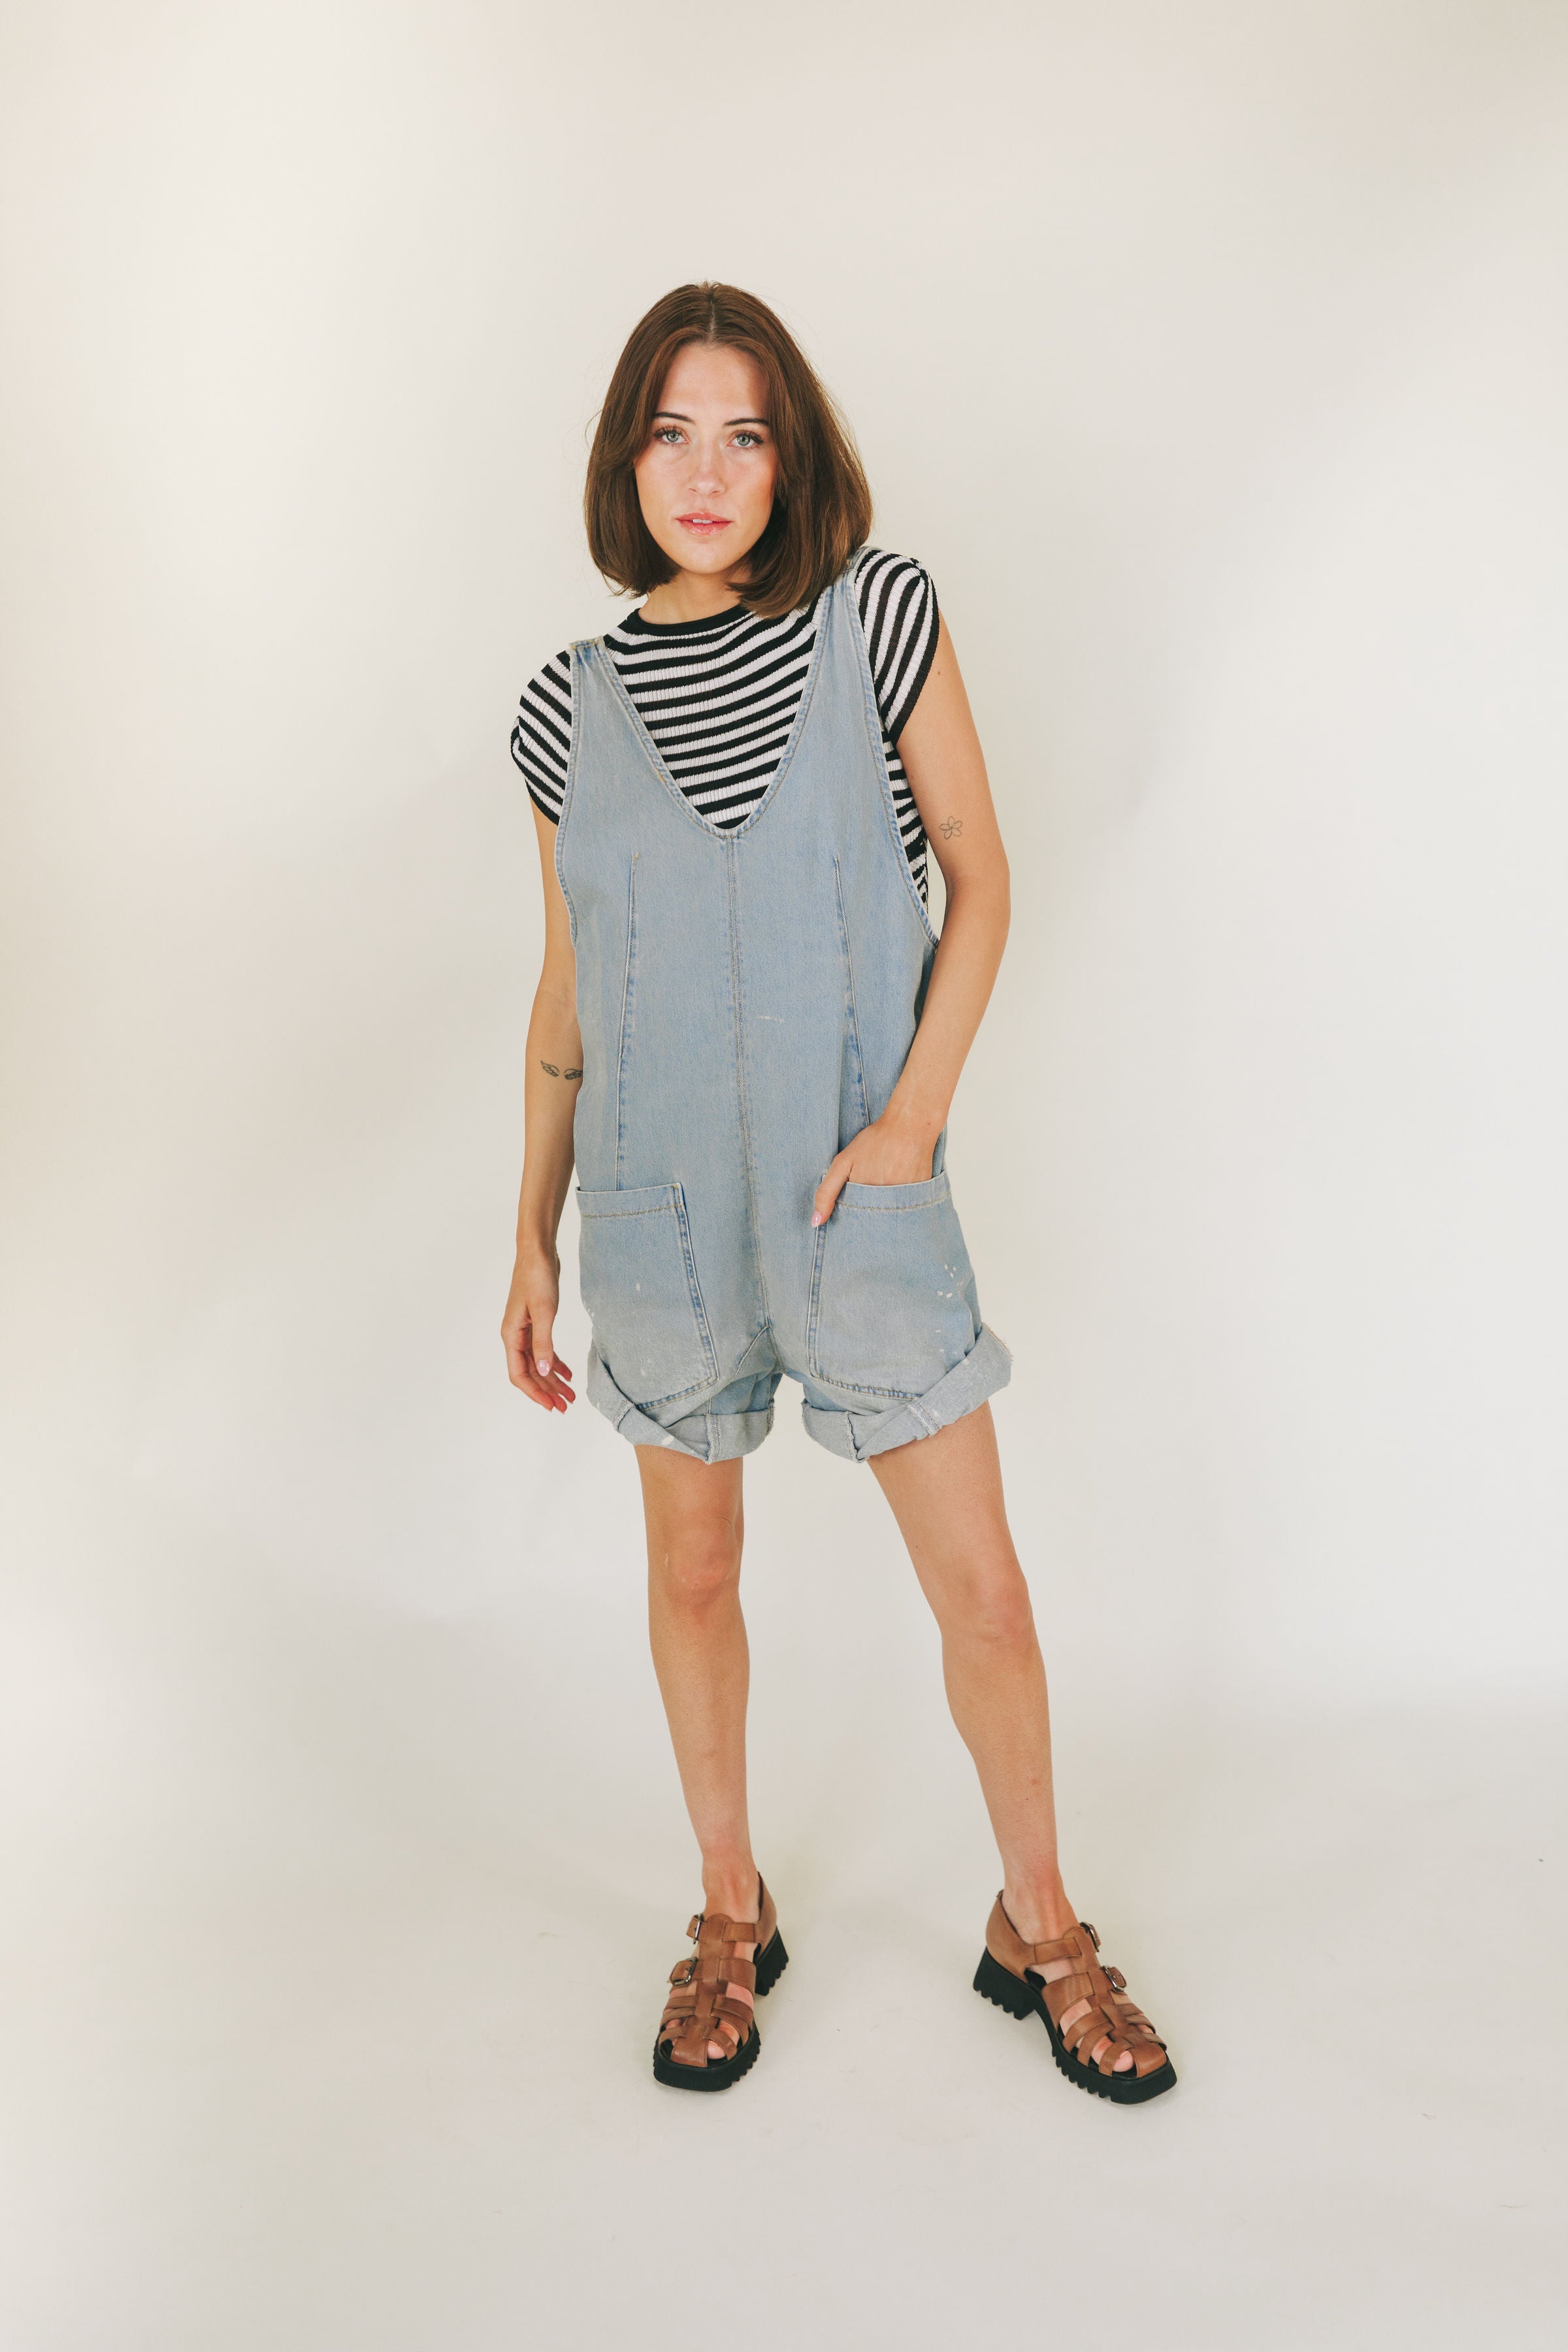 FREE PEOPLE - High Roller Shortall - 2 Colors